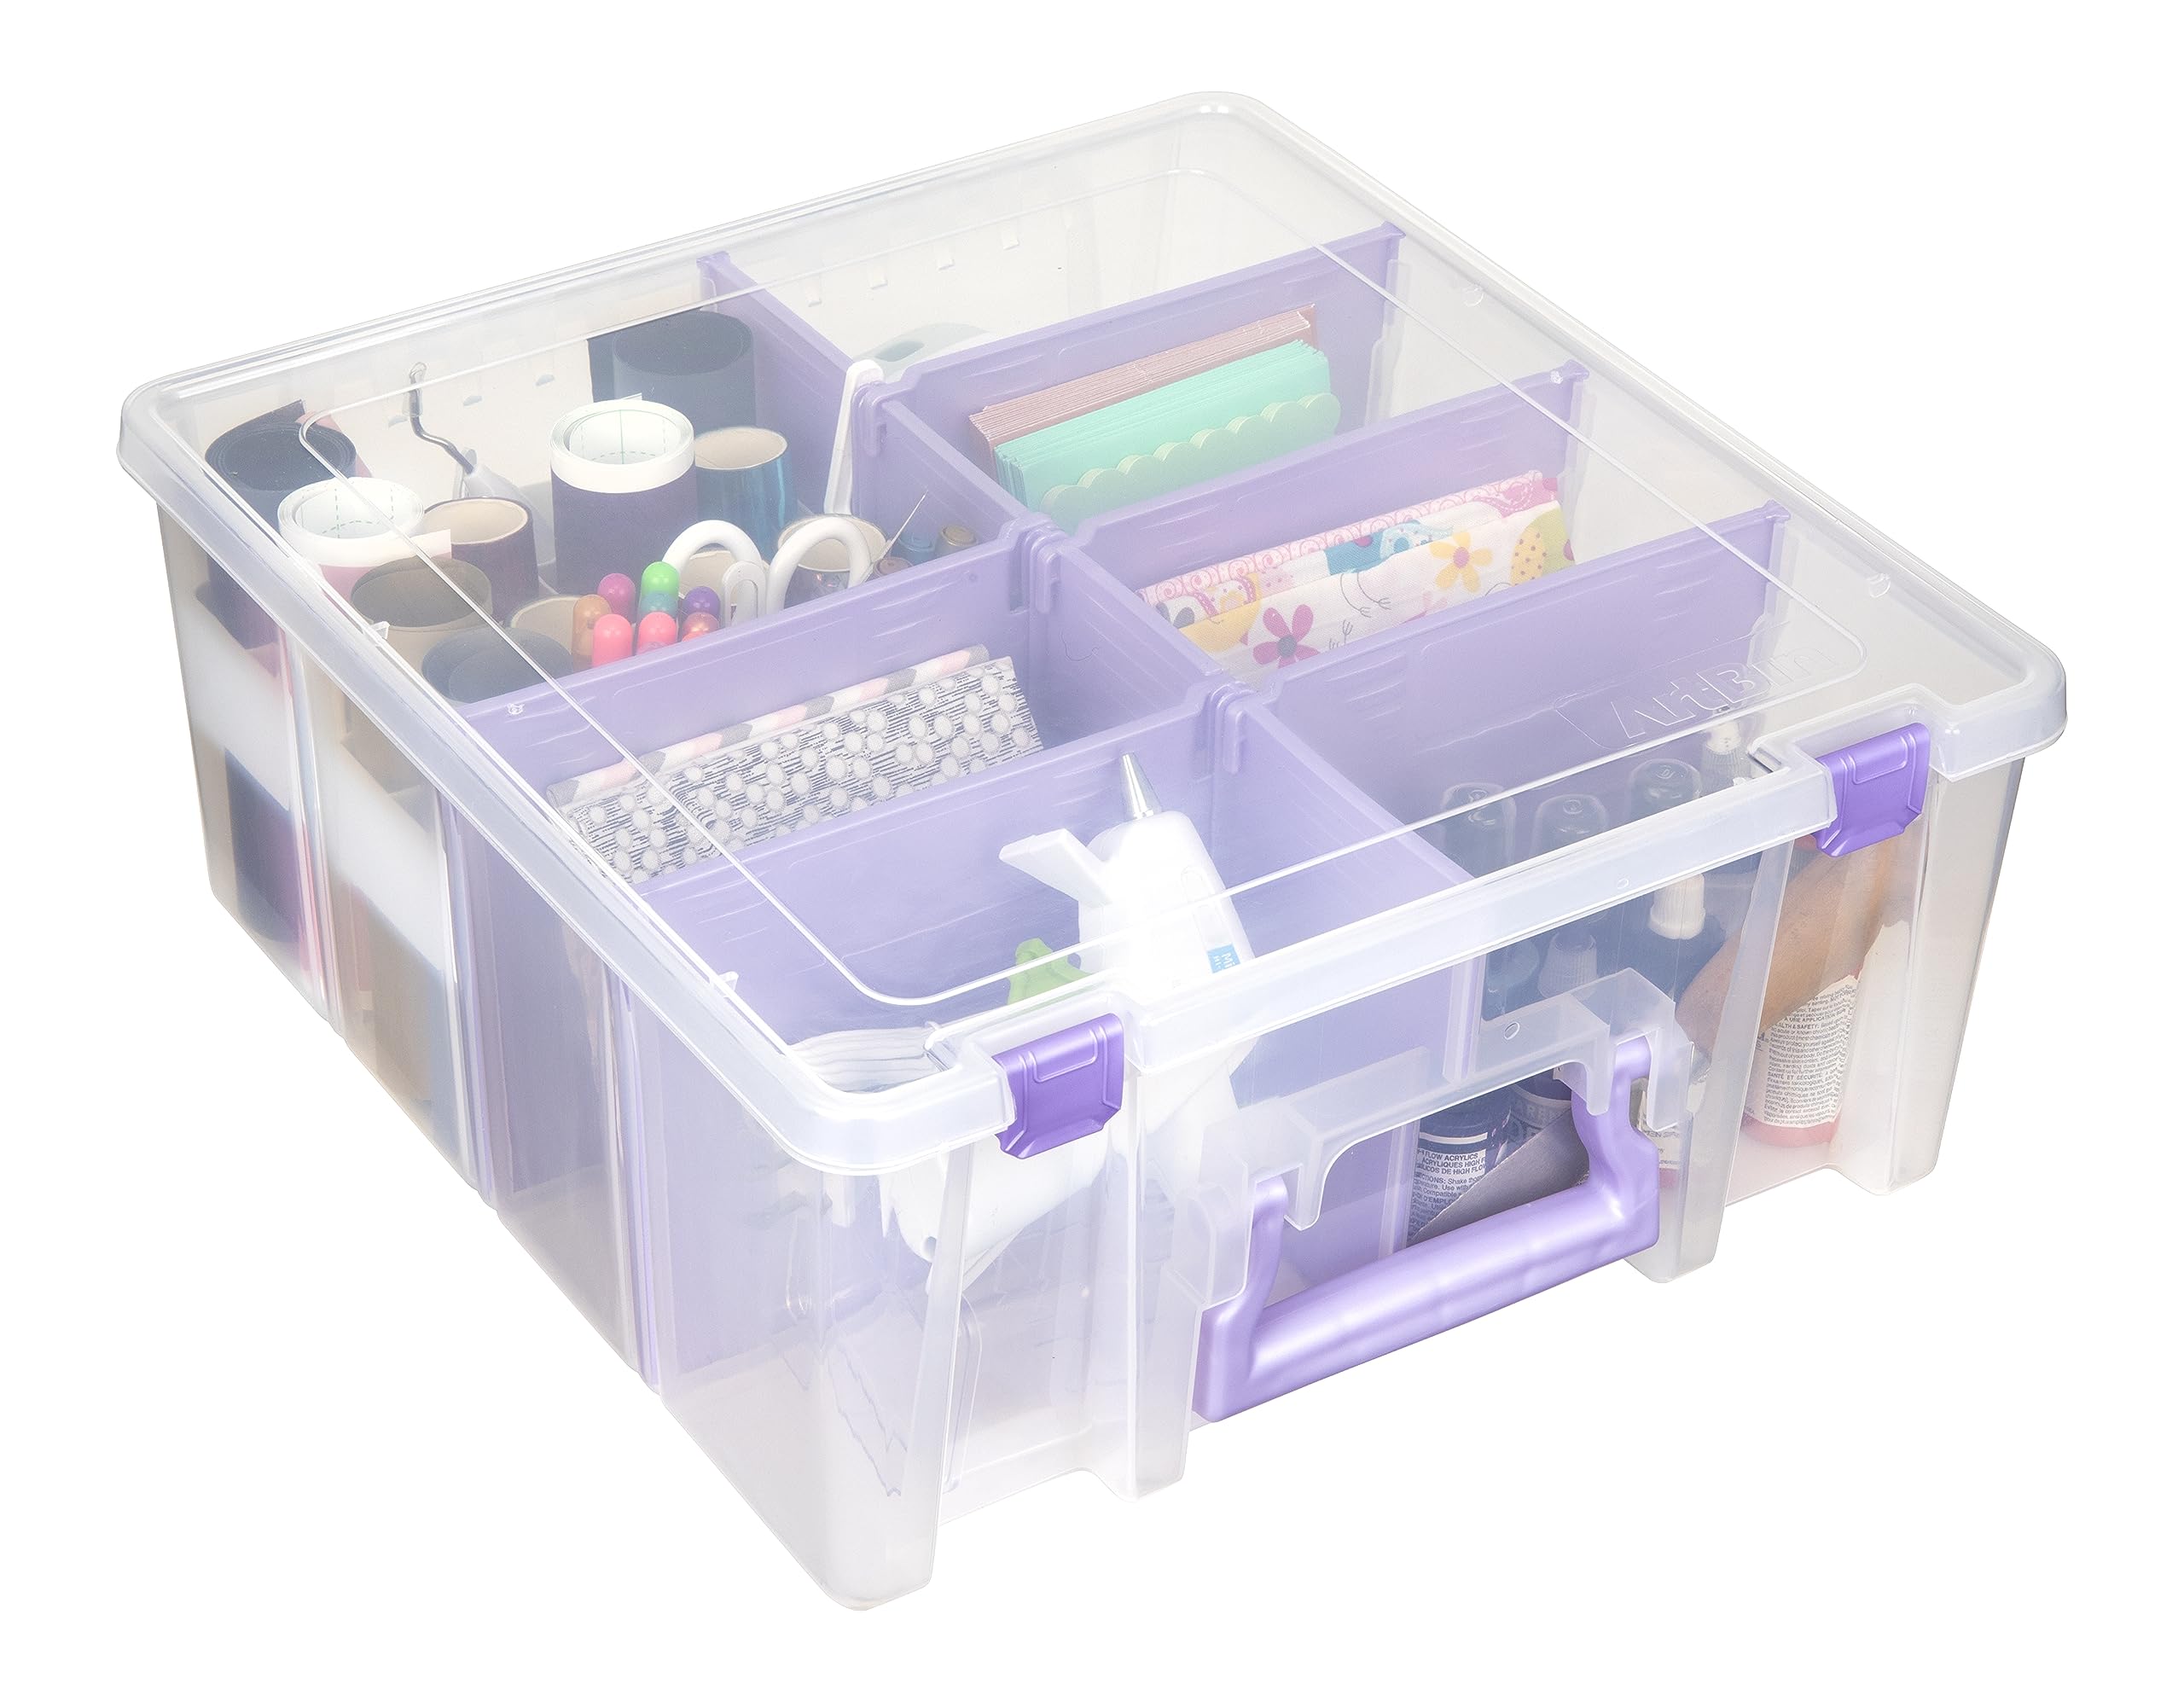 ArtBin Super Satchel Double Deep with Purple Accents Storage Container, Clear